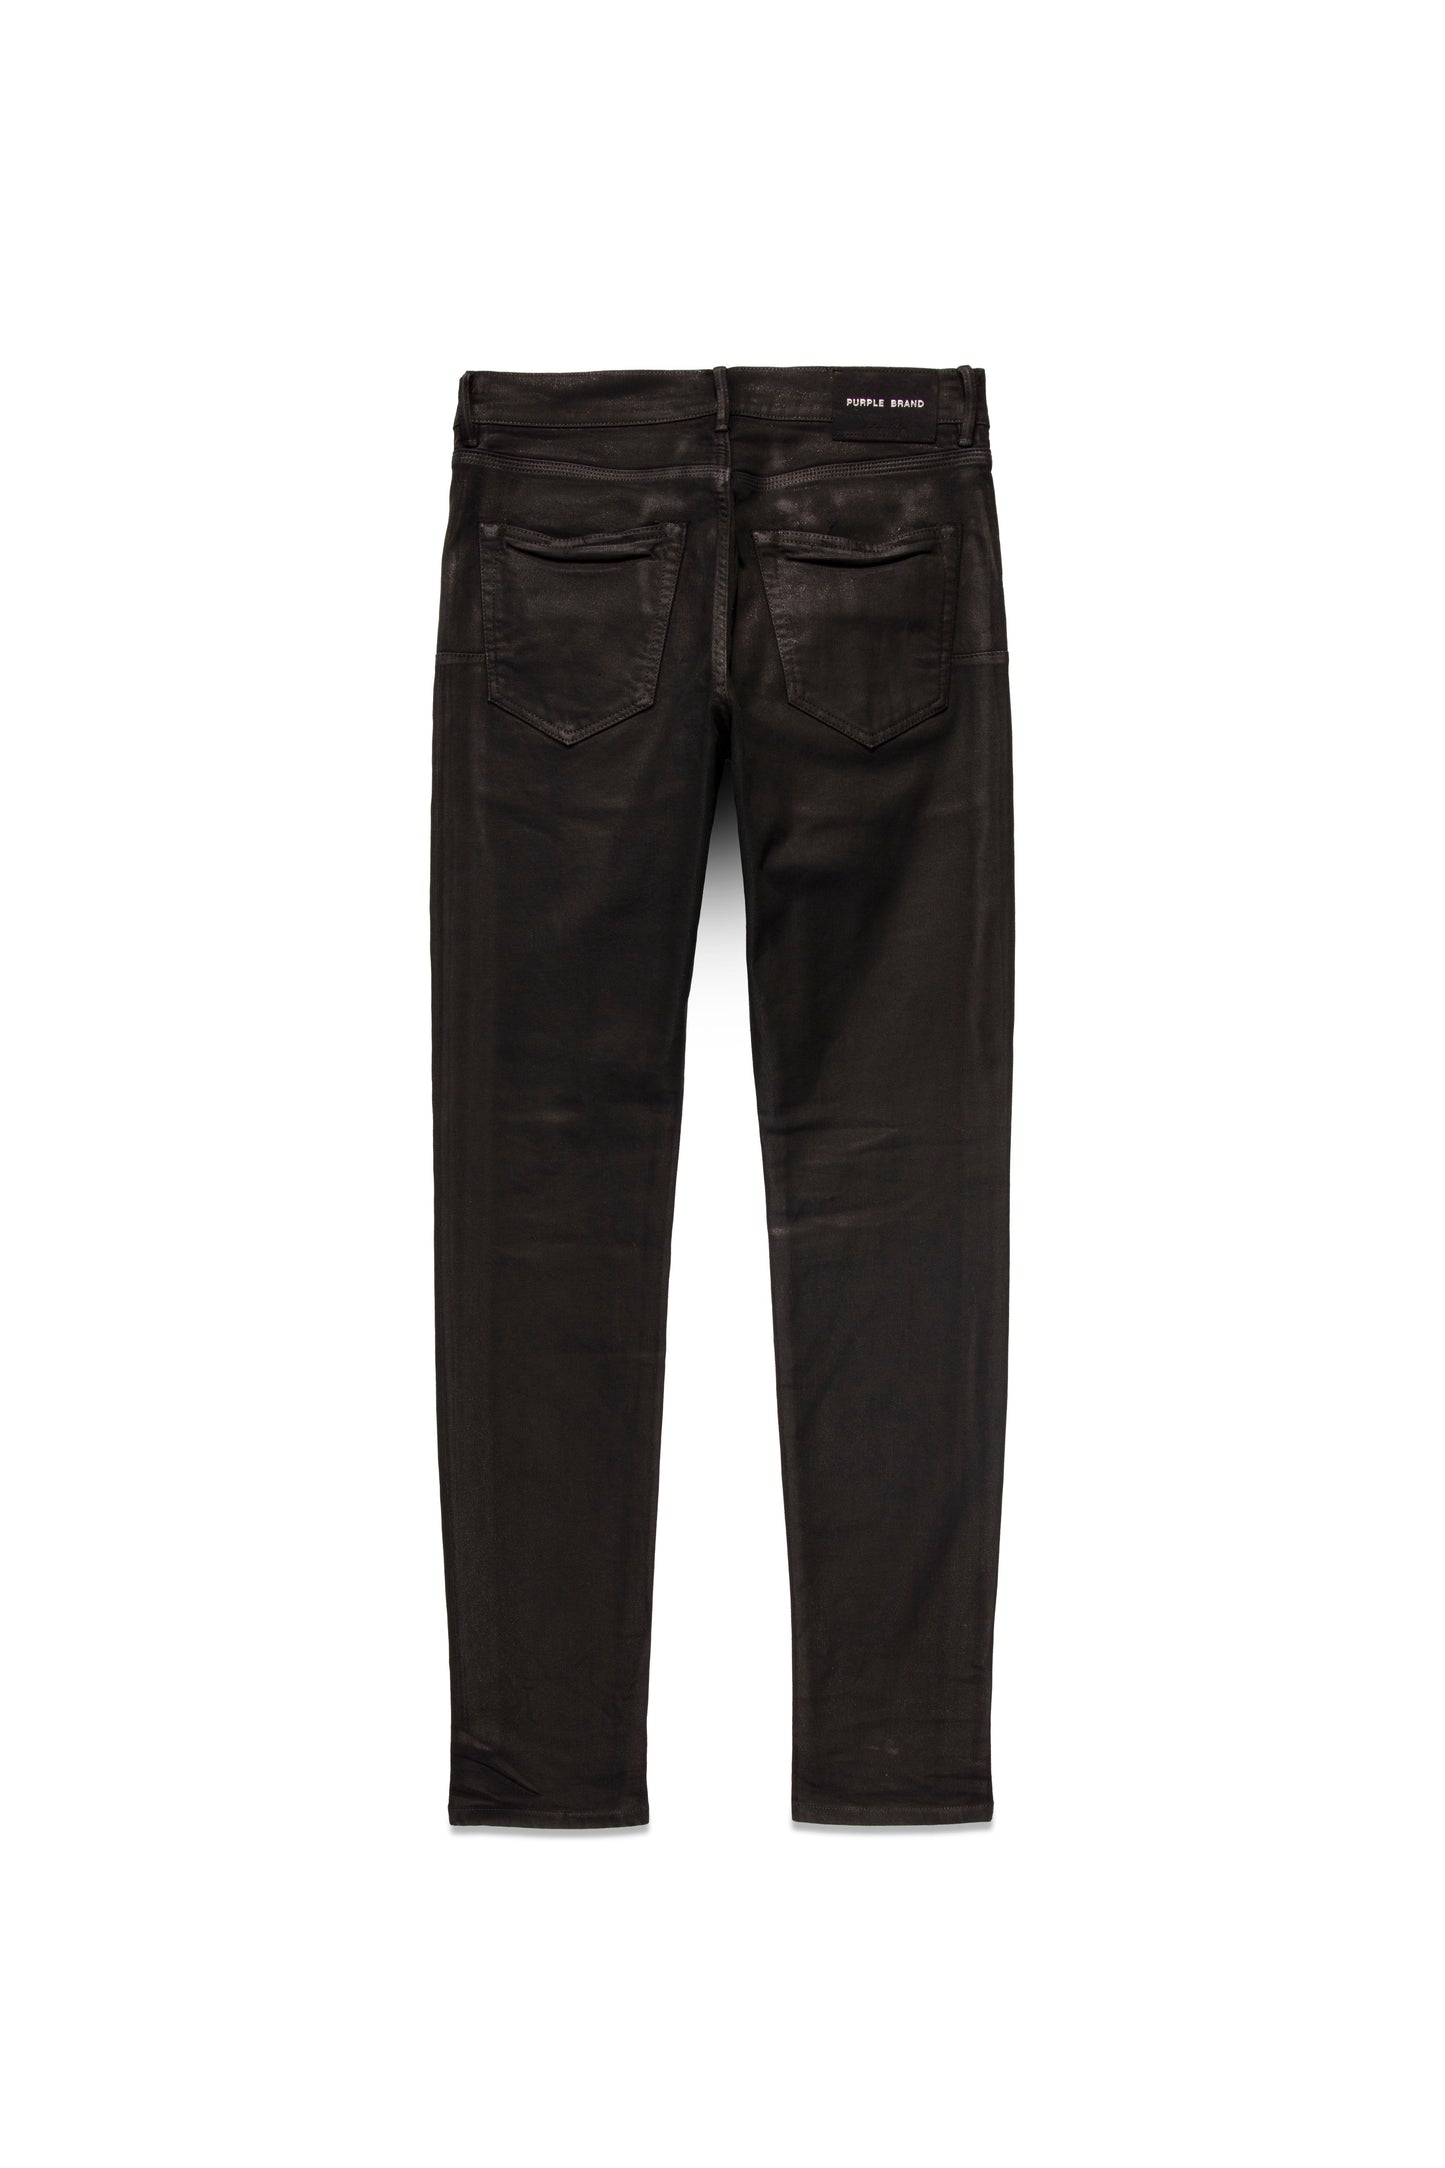 Purple Brand P001 Midnight Coated Jeans - Black - Due West